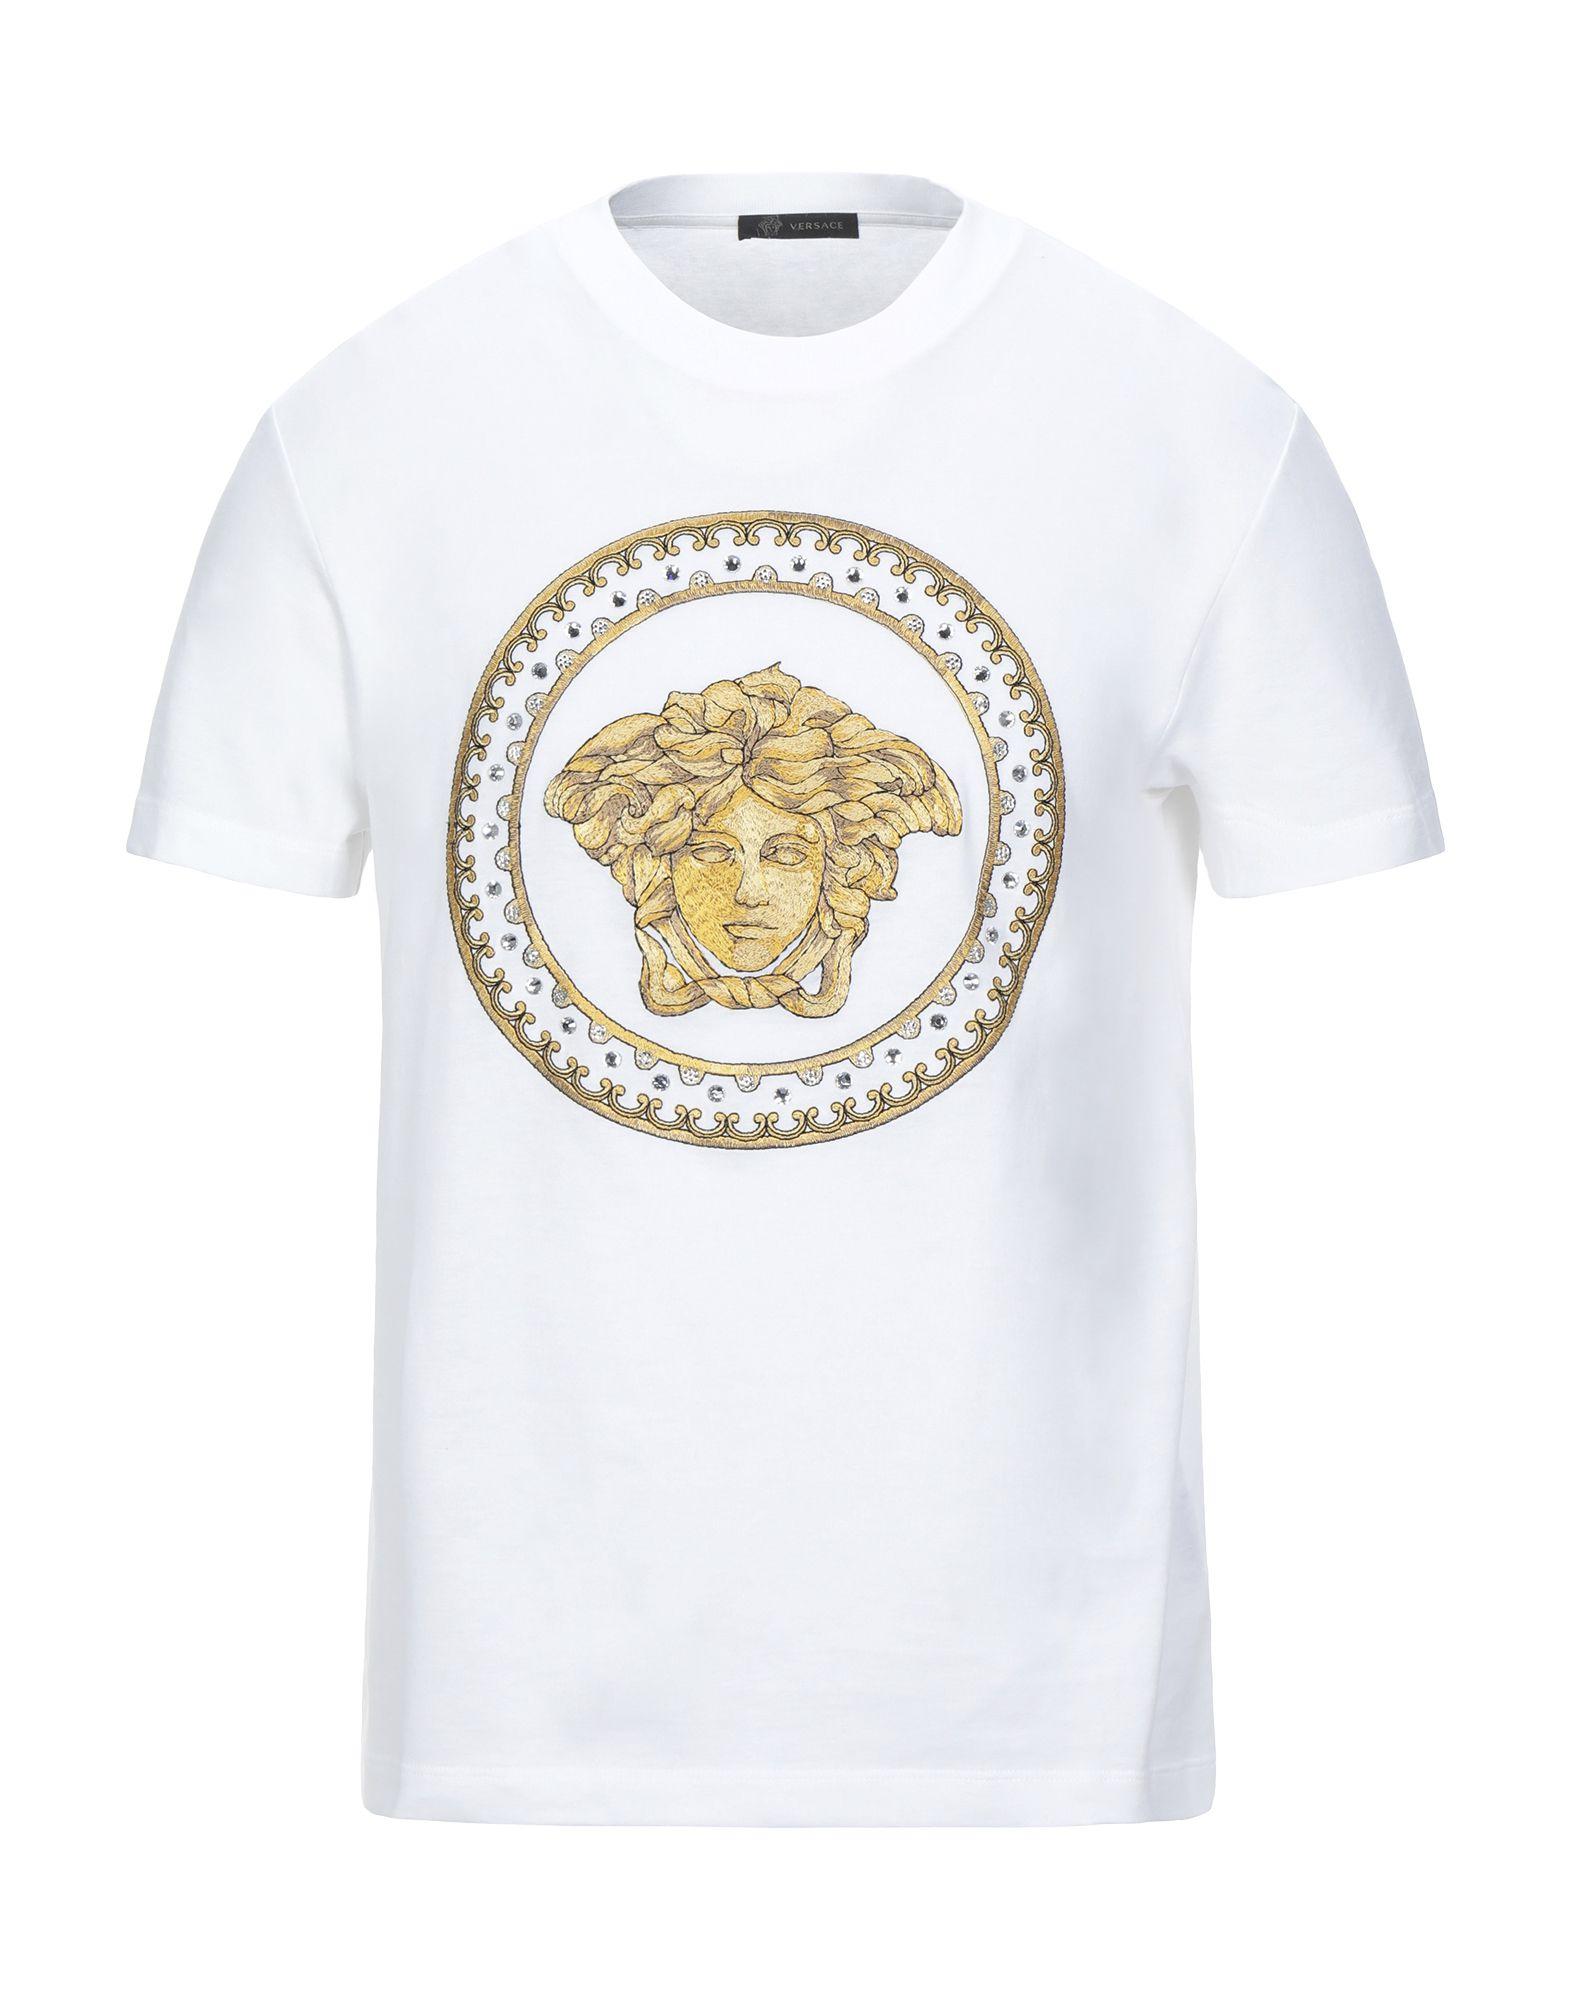 Versace T-shirt in White for Men - Lyst